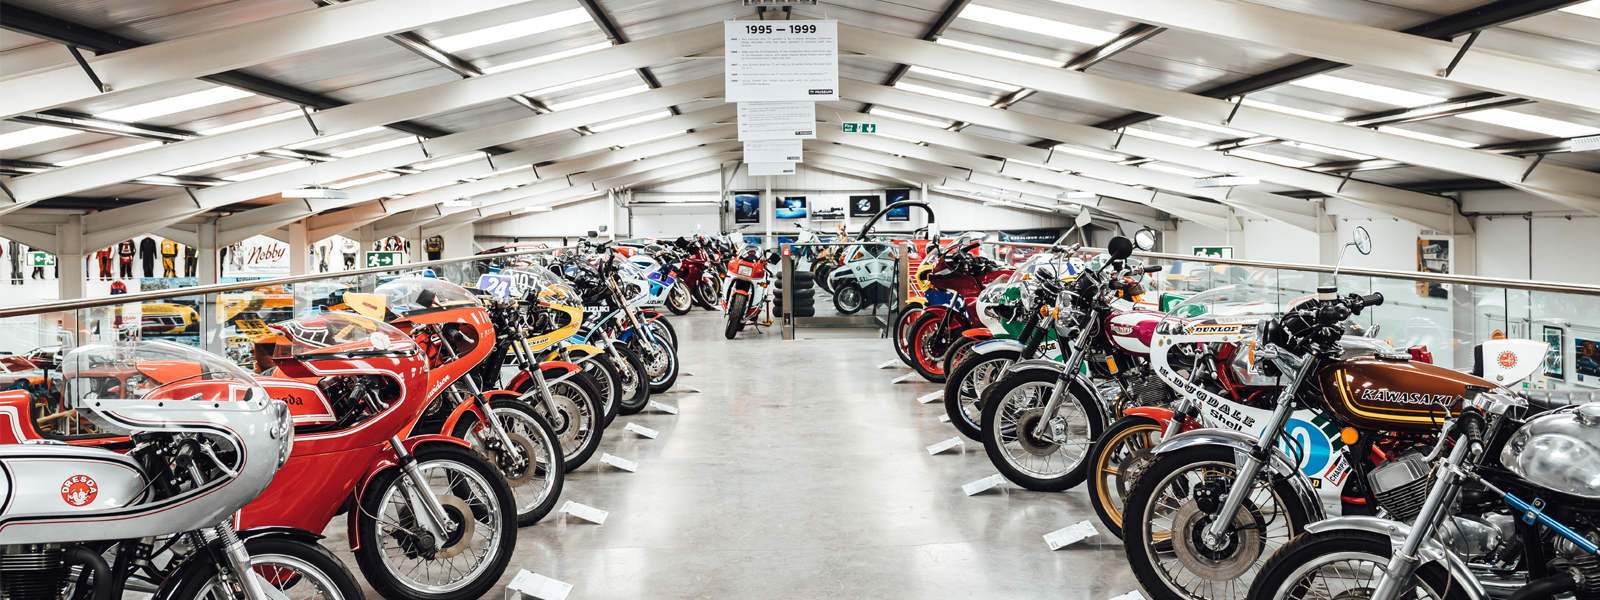 A selection of vintage motorcycle bikes on display at the Isle of Man Motor Museum